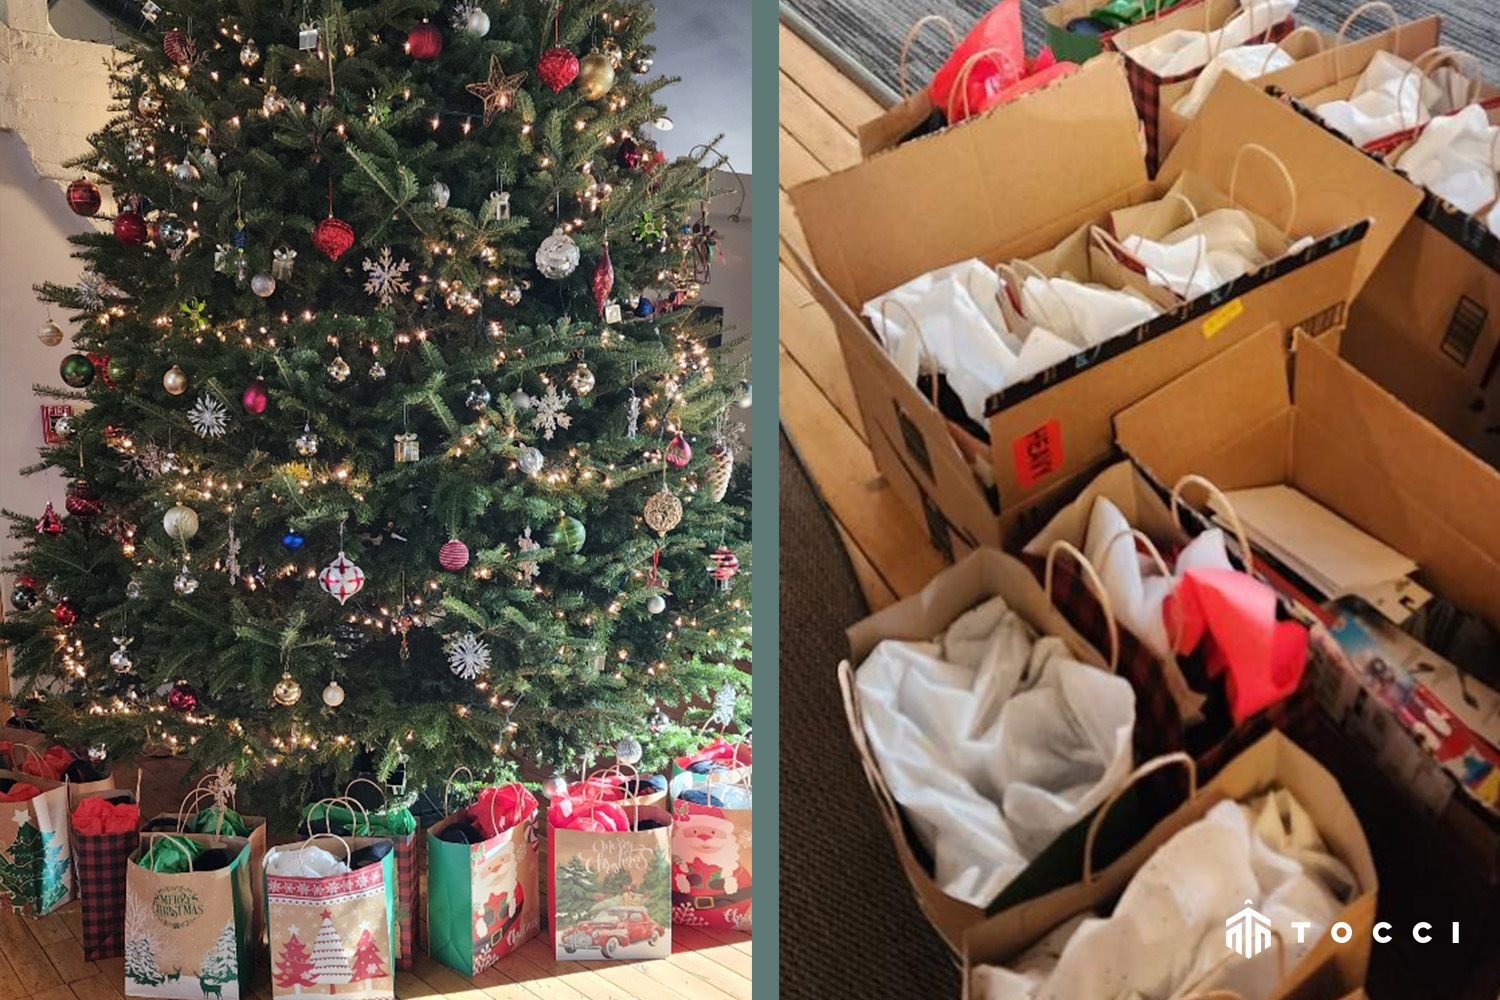 Pictures of tree and closeup of presents for Straight Ahead Ministries